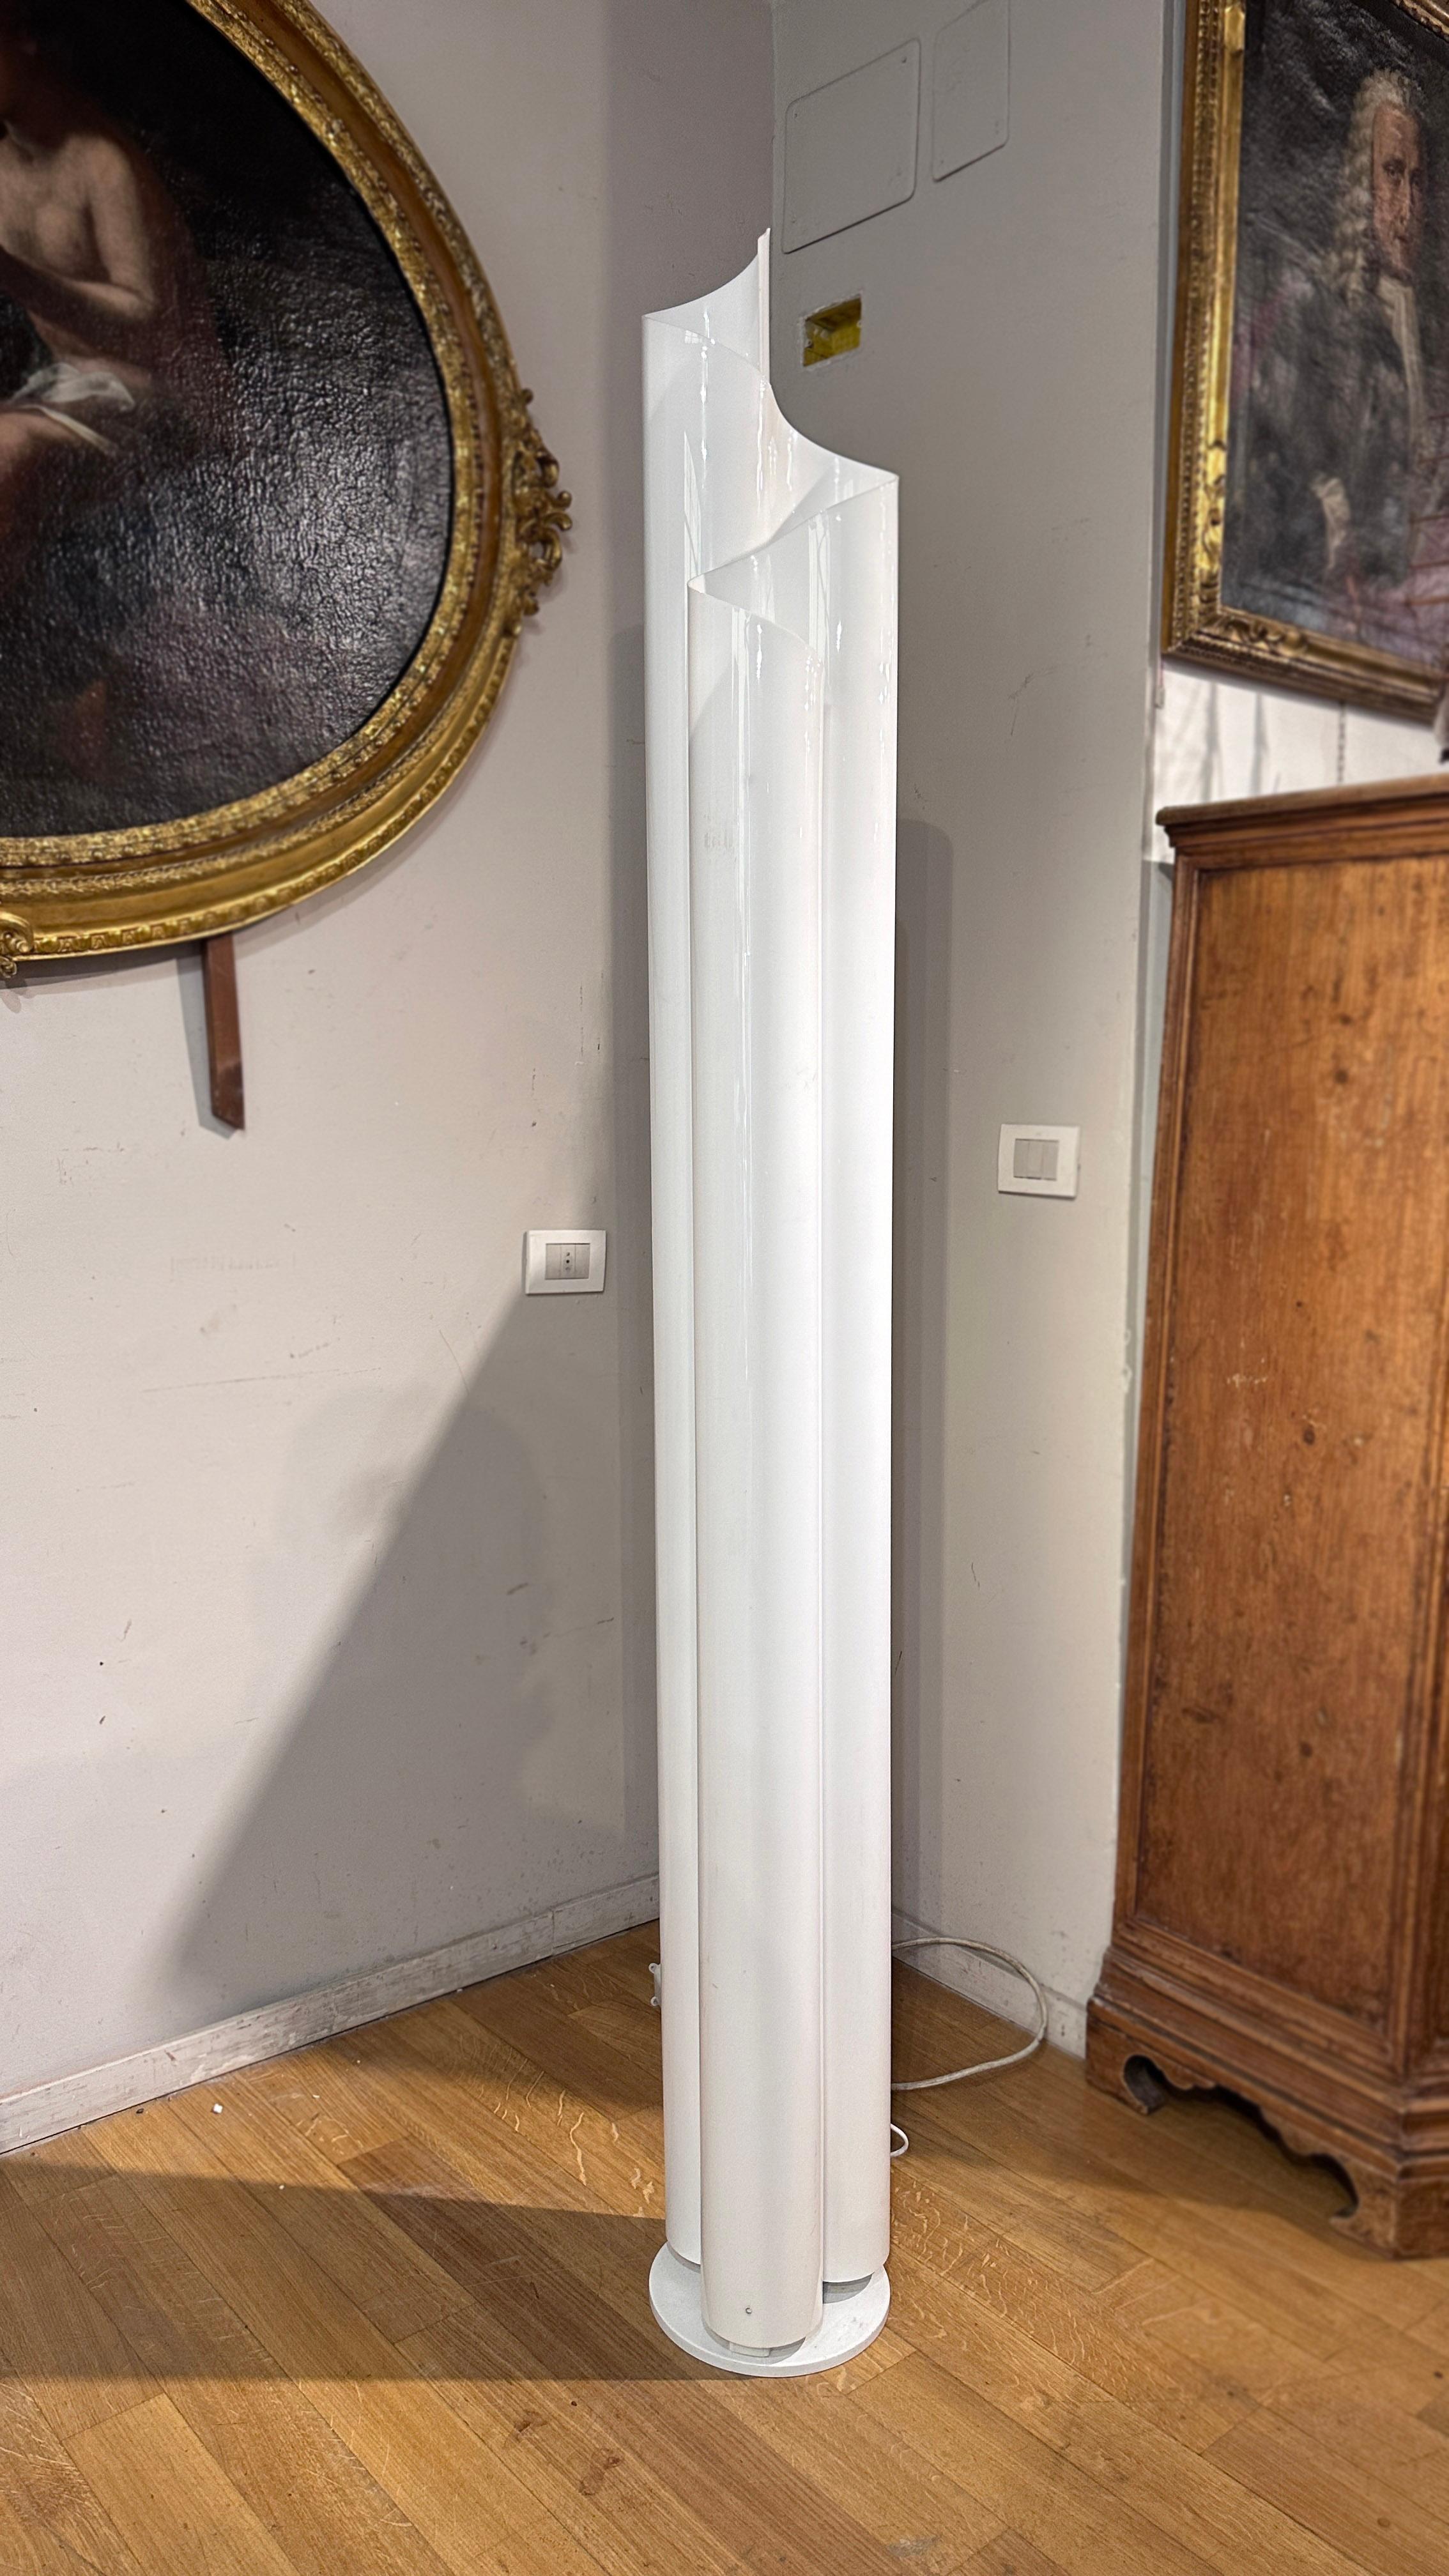 Designer floor lamp from the 1970s, created by Vico Magistretti for Artemide. The 